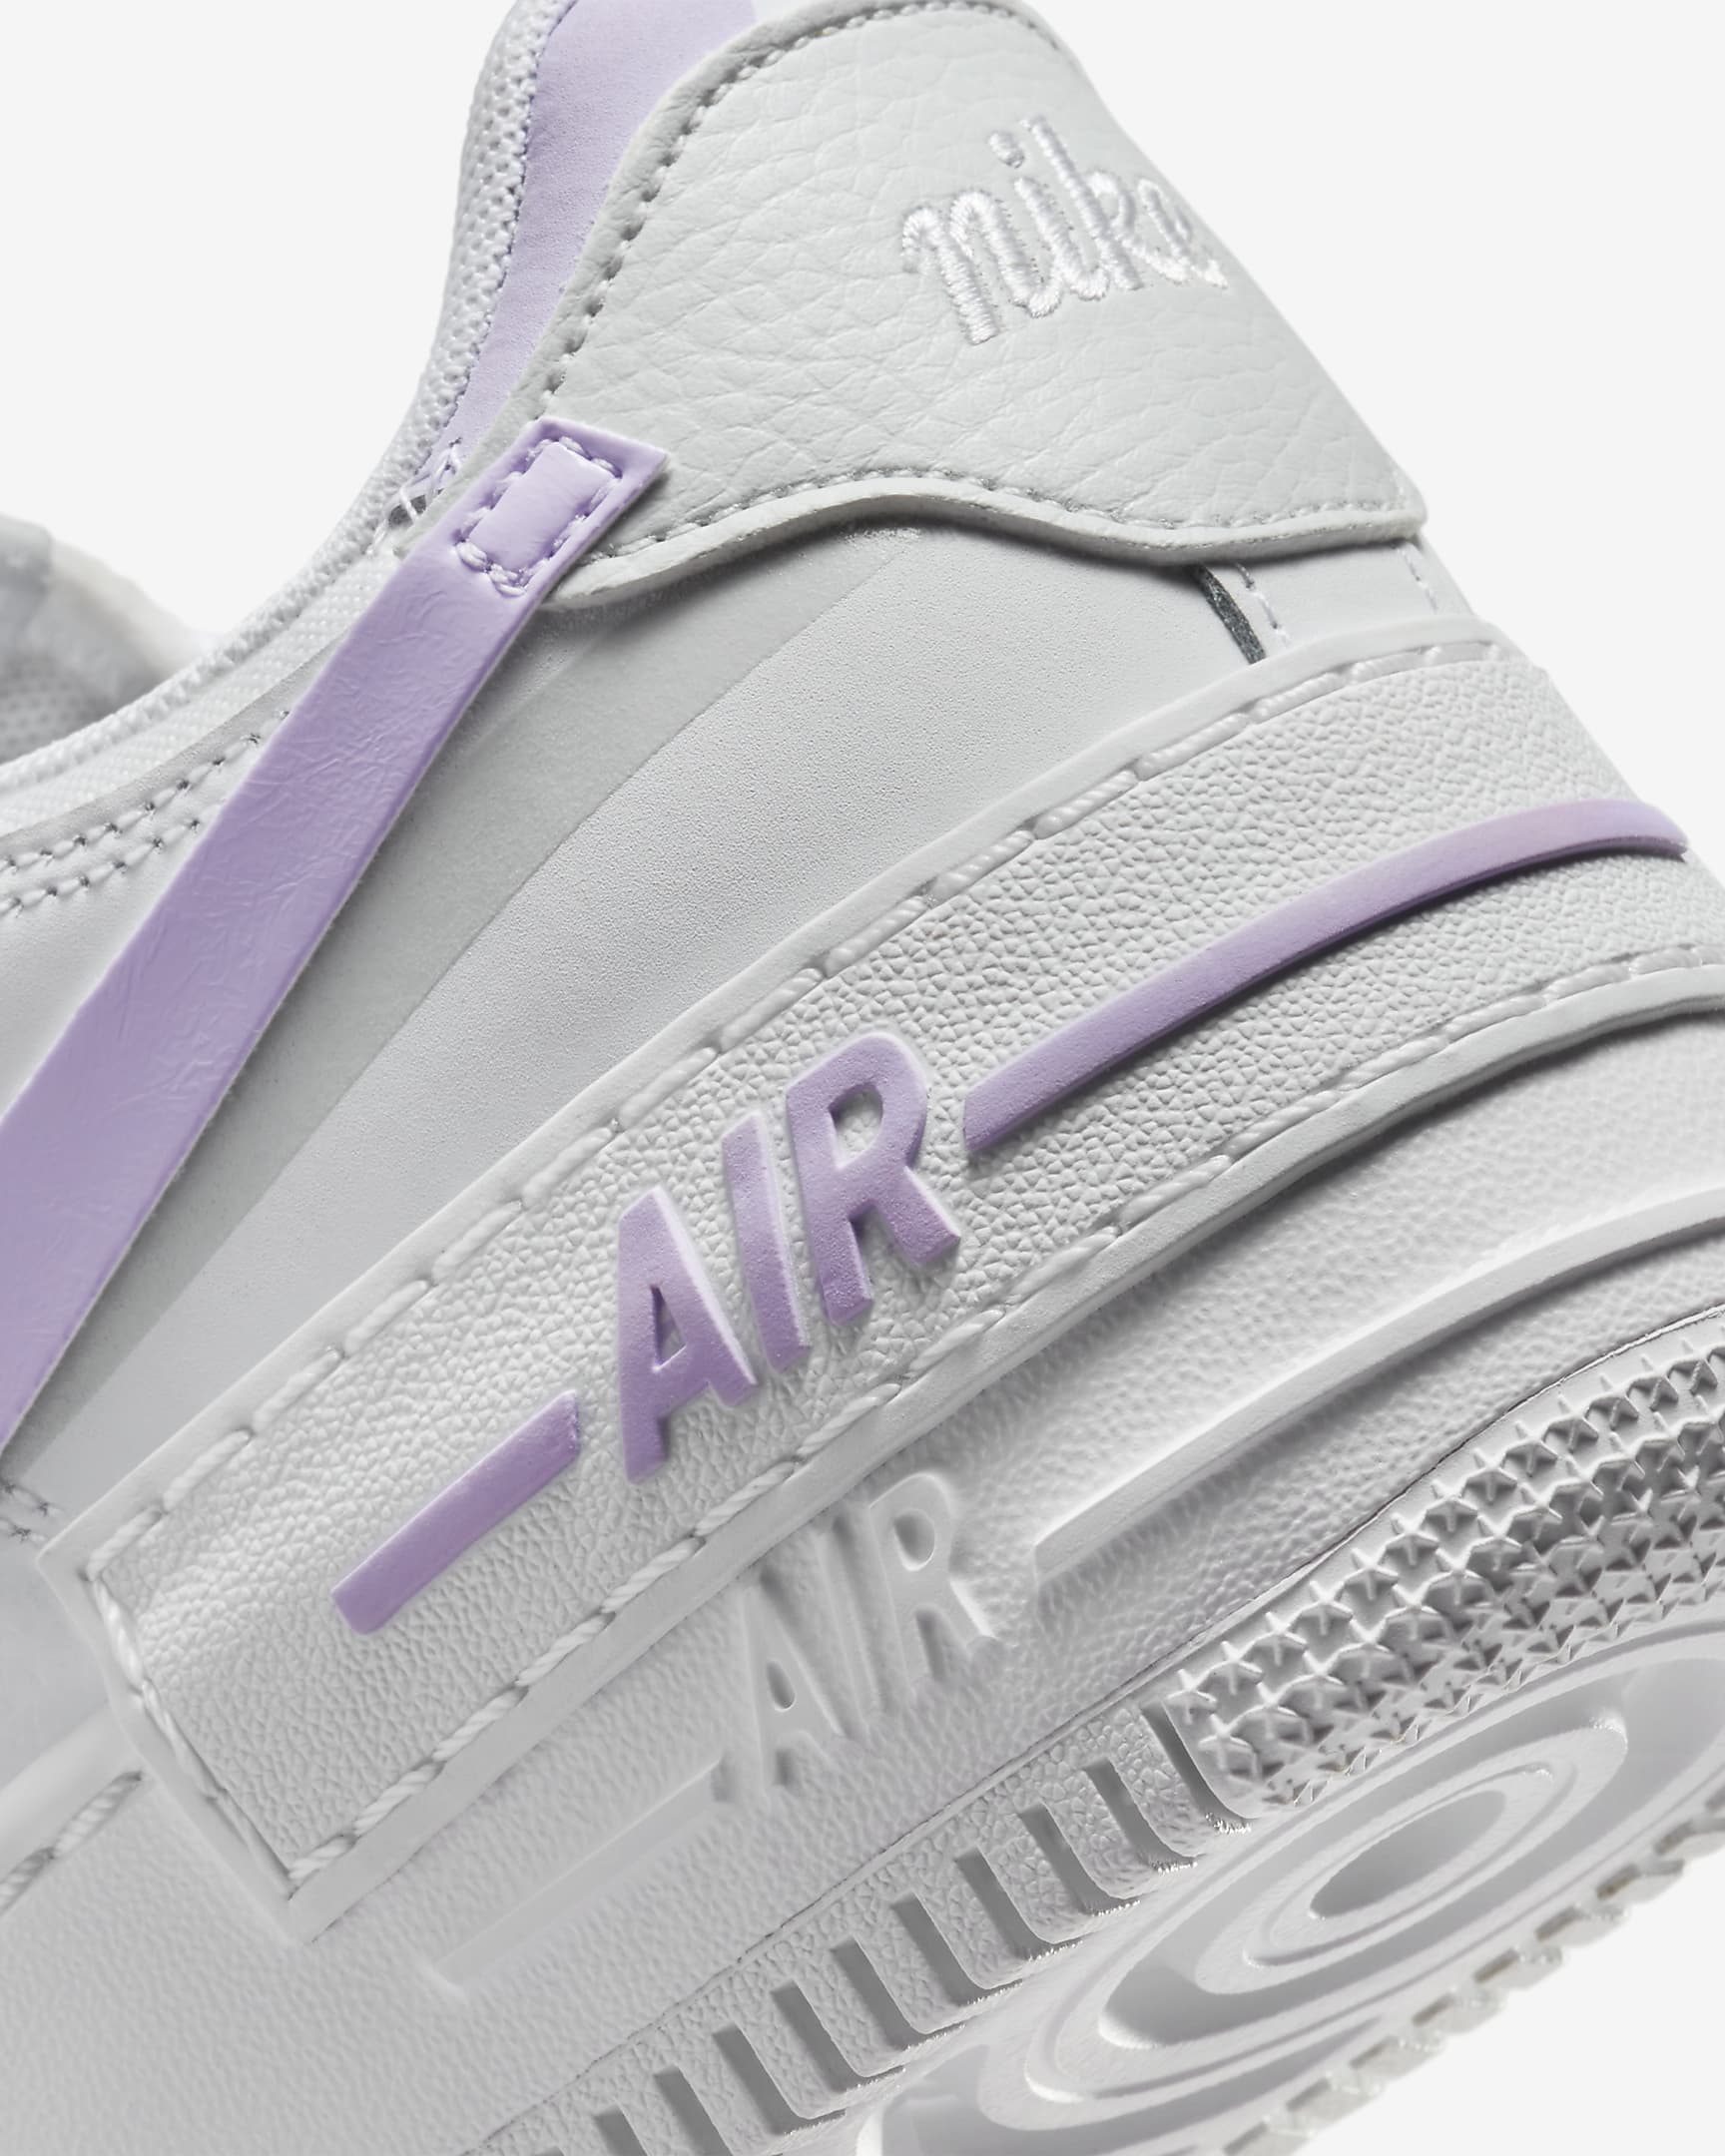 Nike Air Force 1 Shadow Women's Shoes - White/Photon Dust/White/Lilac Bloom